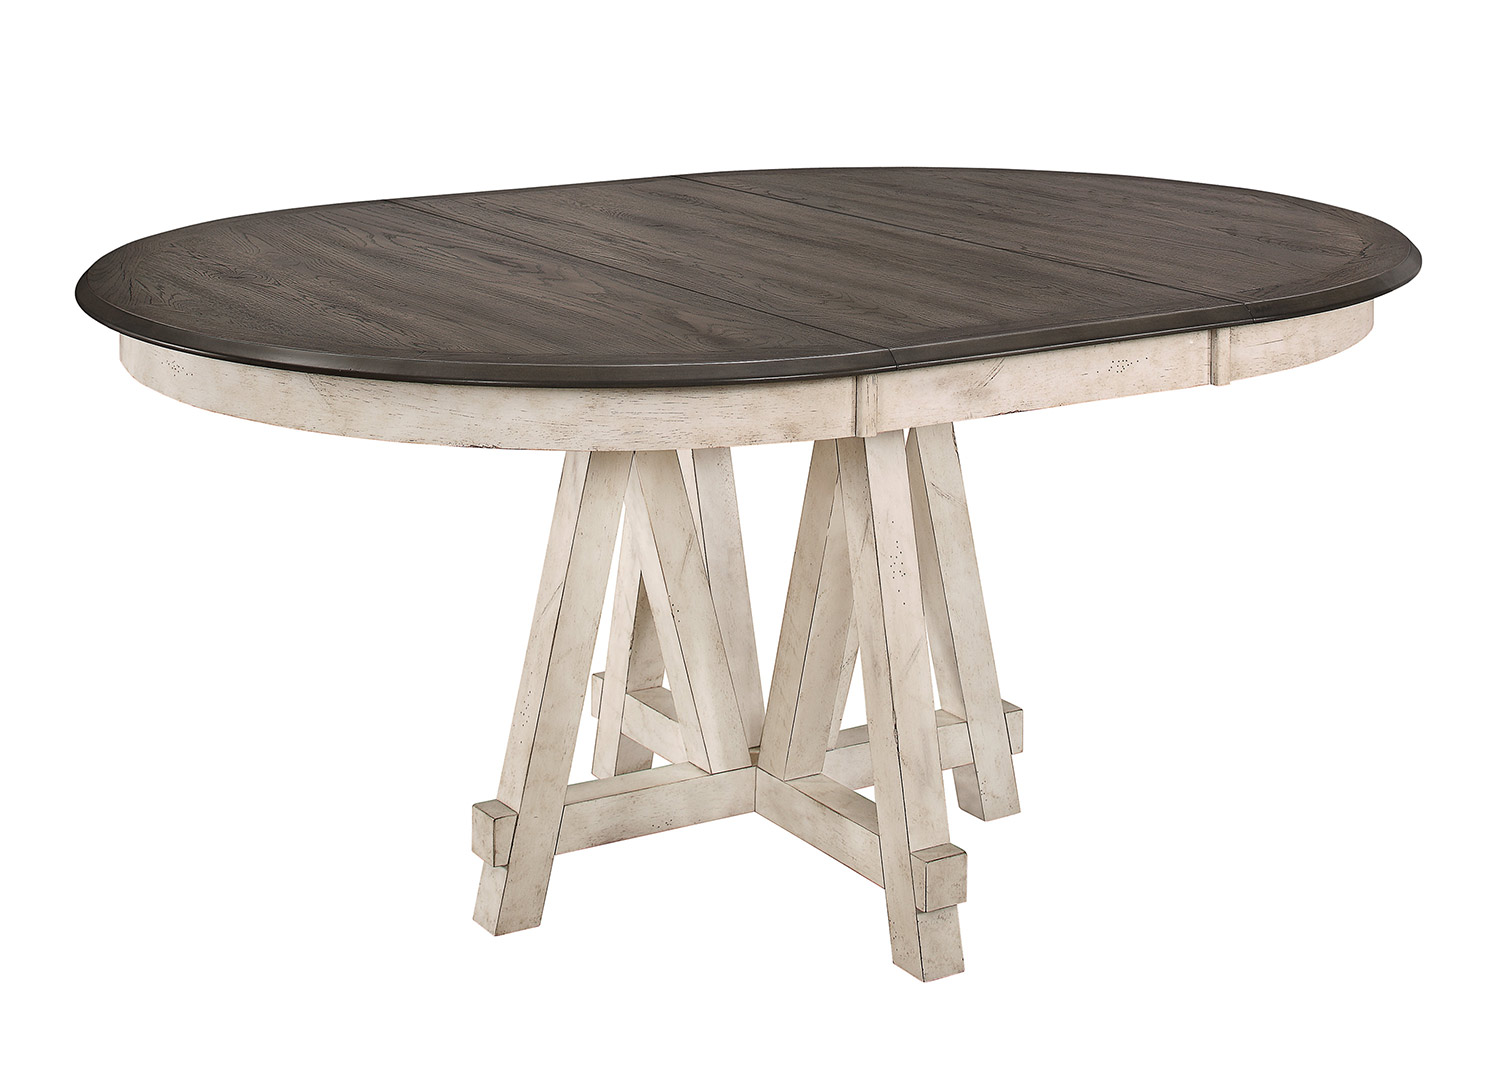 Homelegance Clover Round/Oval Dining Table - Rustic Gray